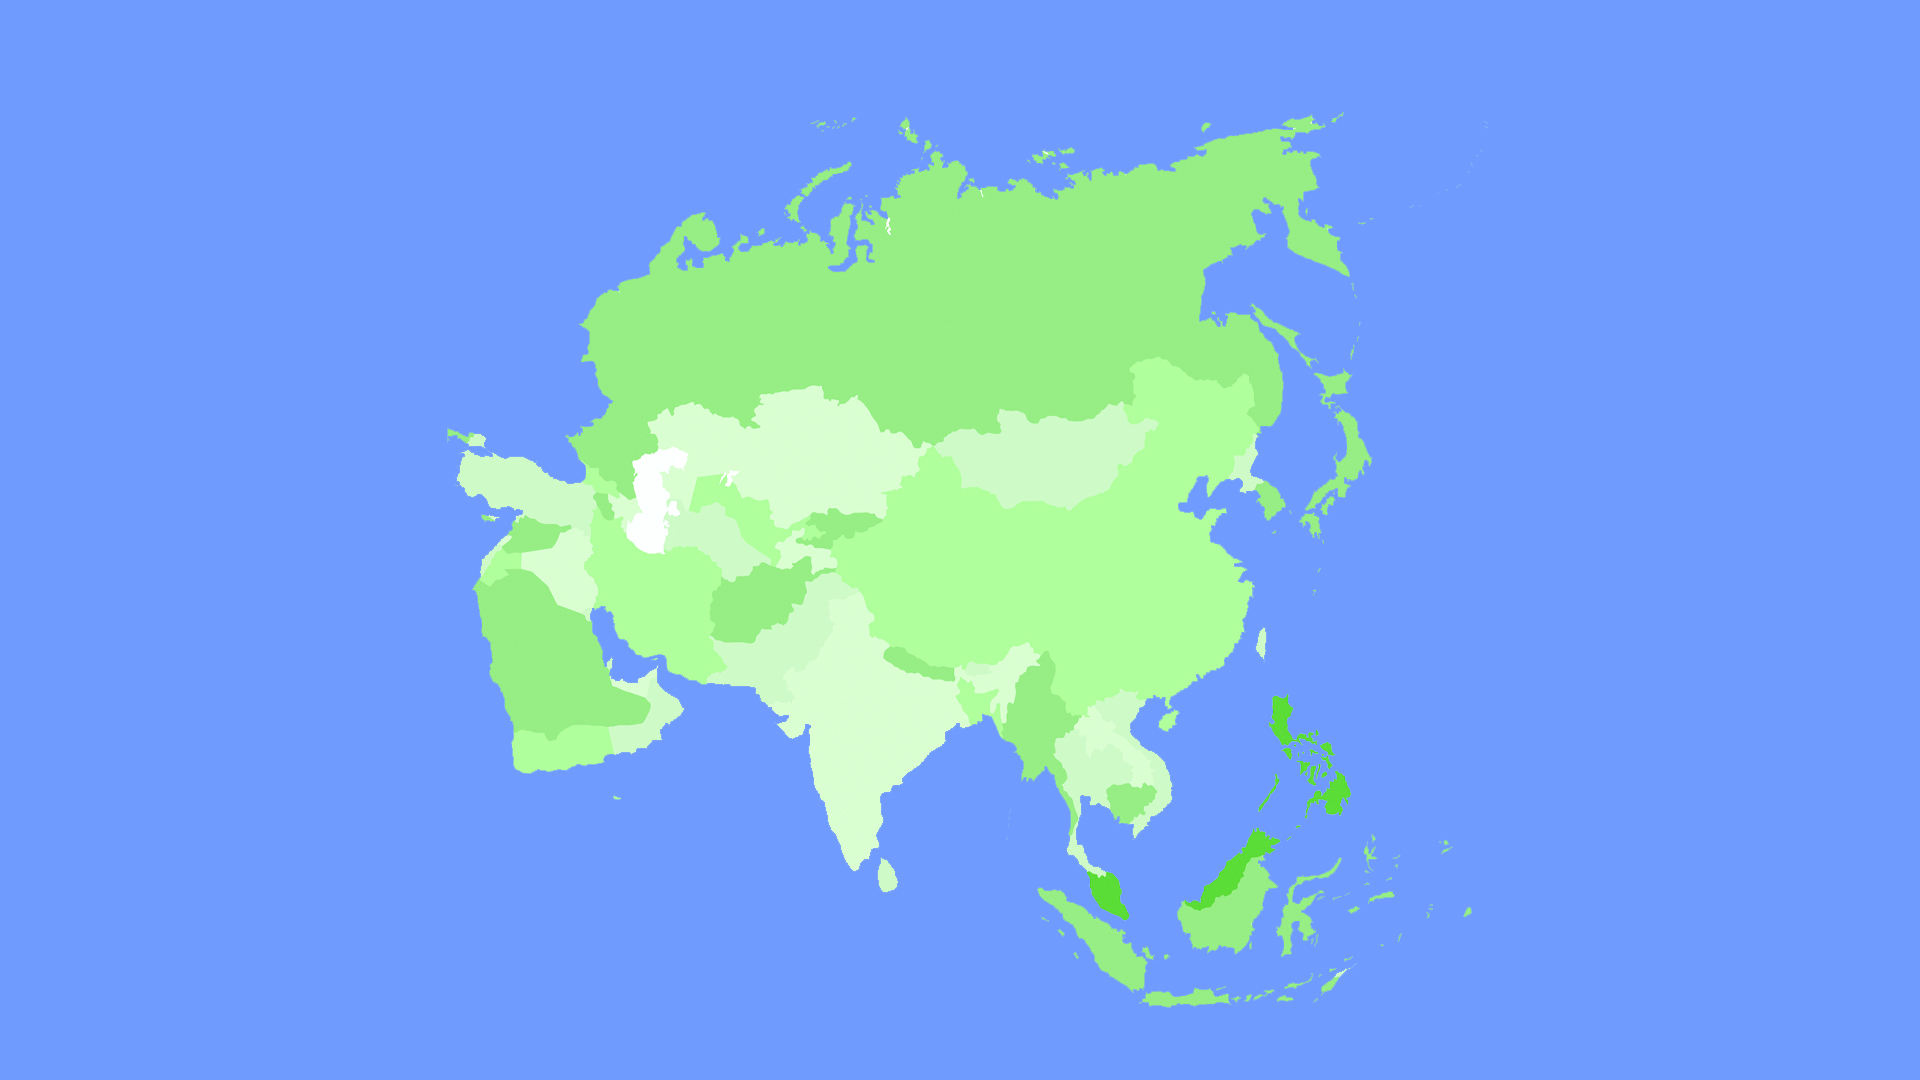 A map of Asia